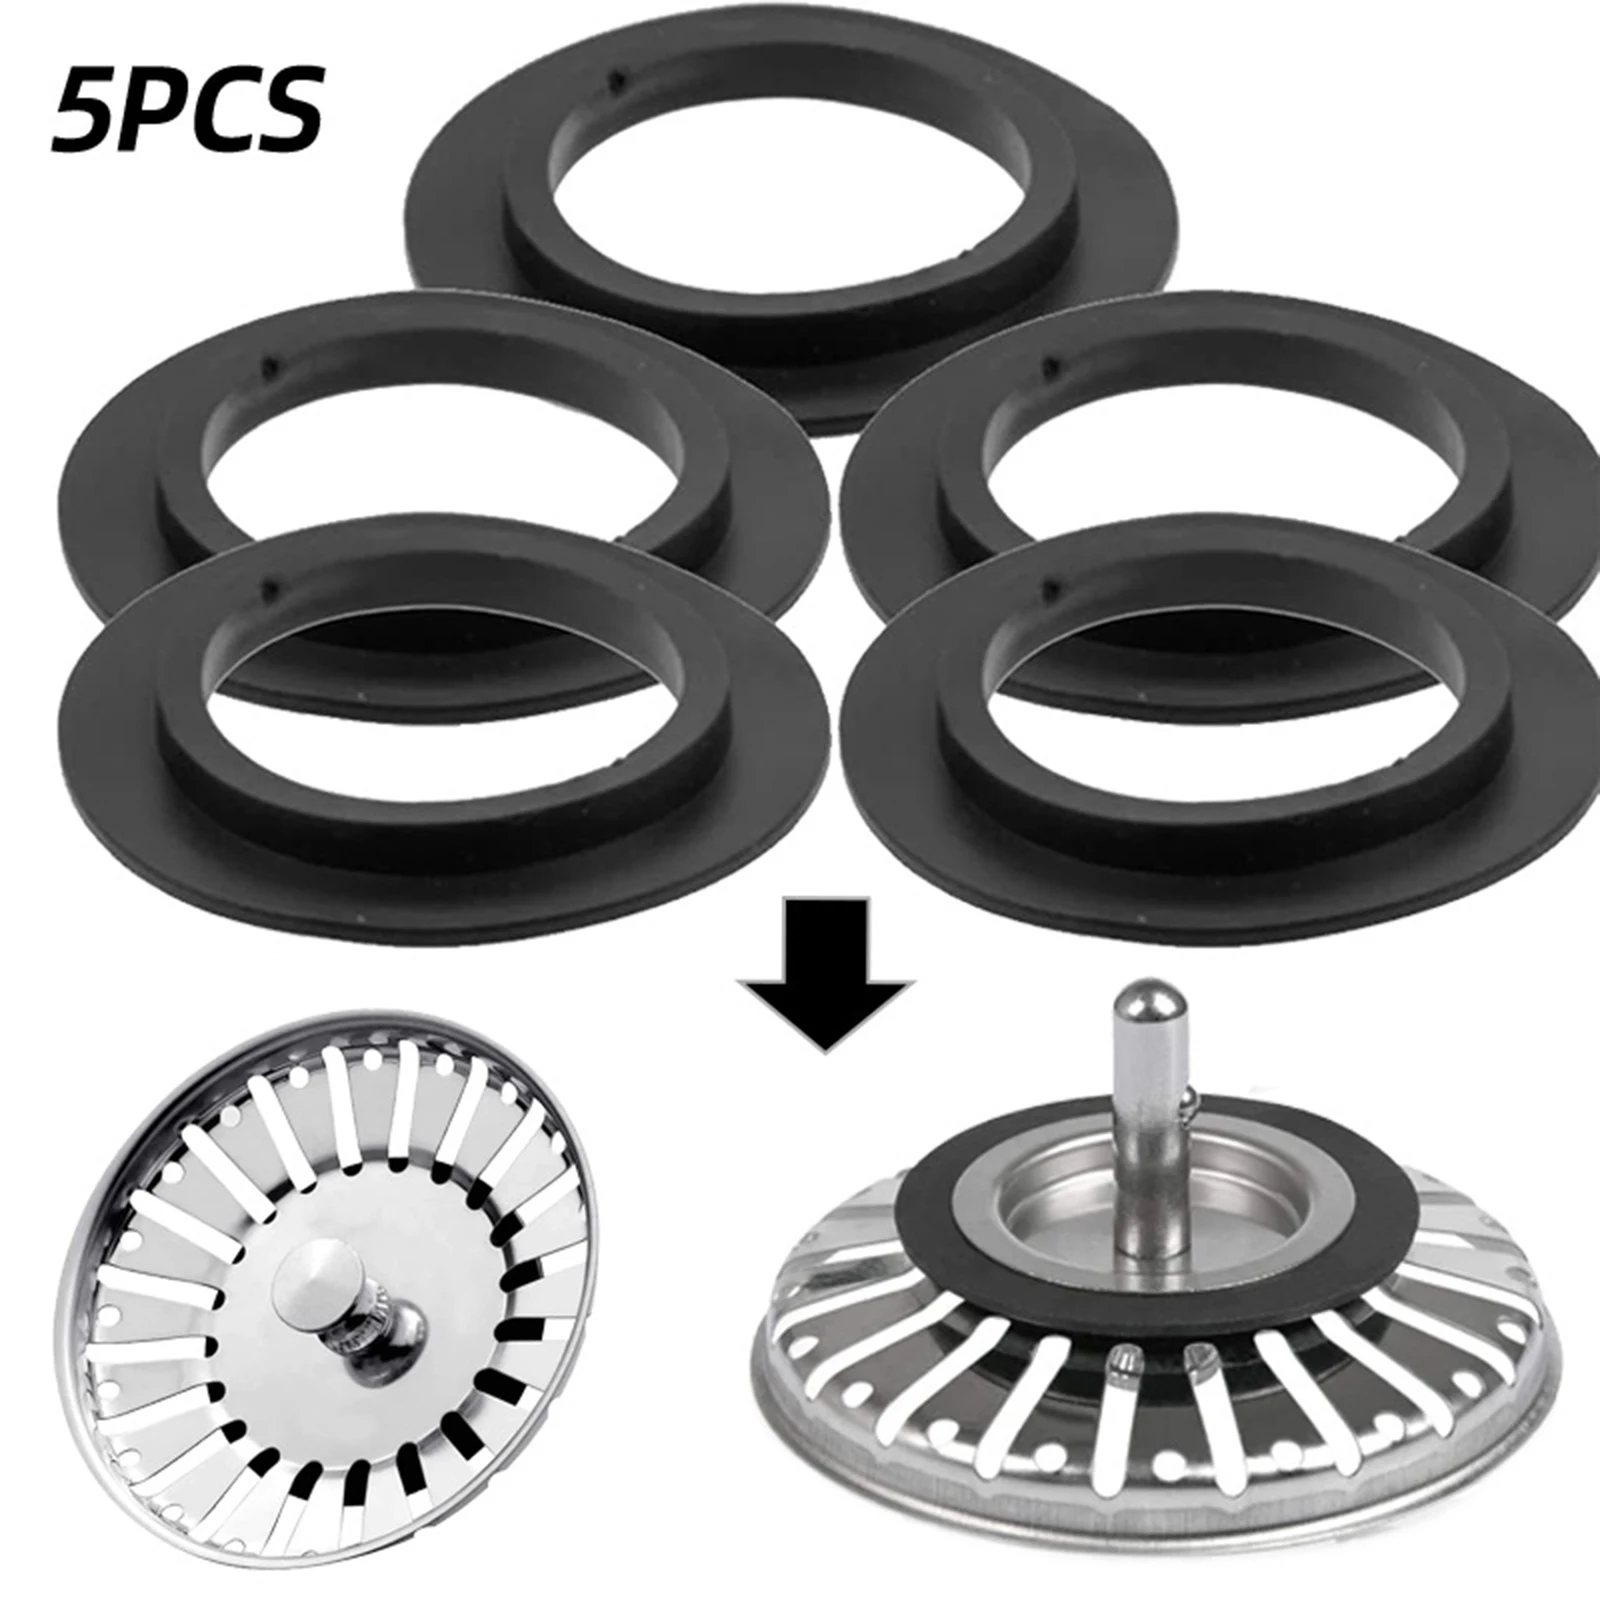 5Pcs Rubber Waterproof Gasket Strainer Seals Durable O-ring Washer Gaskets Kitchen Sink Filter Replacement Accessories 5pcs rubber carburetor float bowl gaskets o ring for carb 693981 280492 111000 2069316 lawn mower accessories gardening supplies